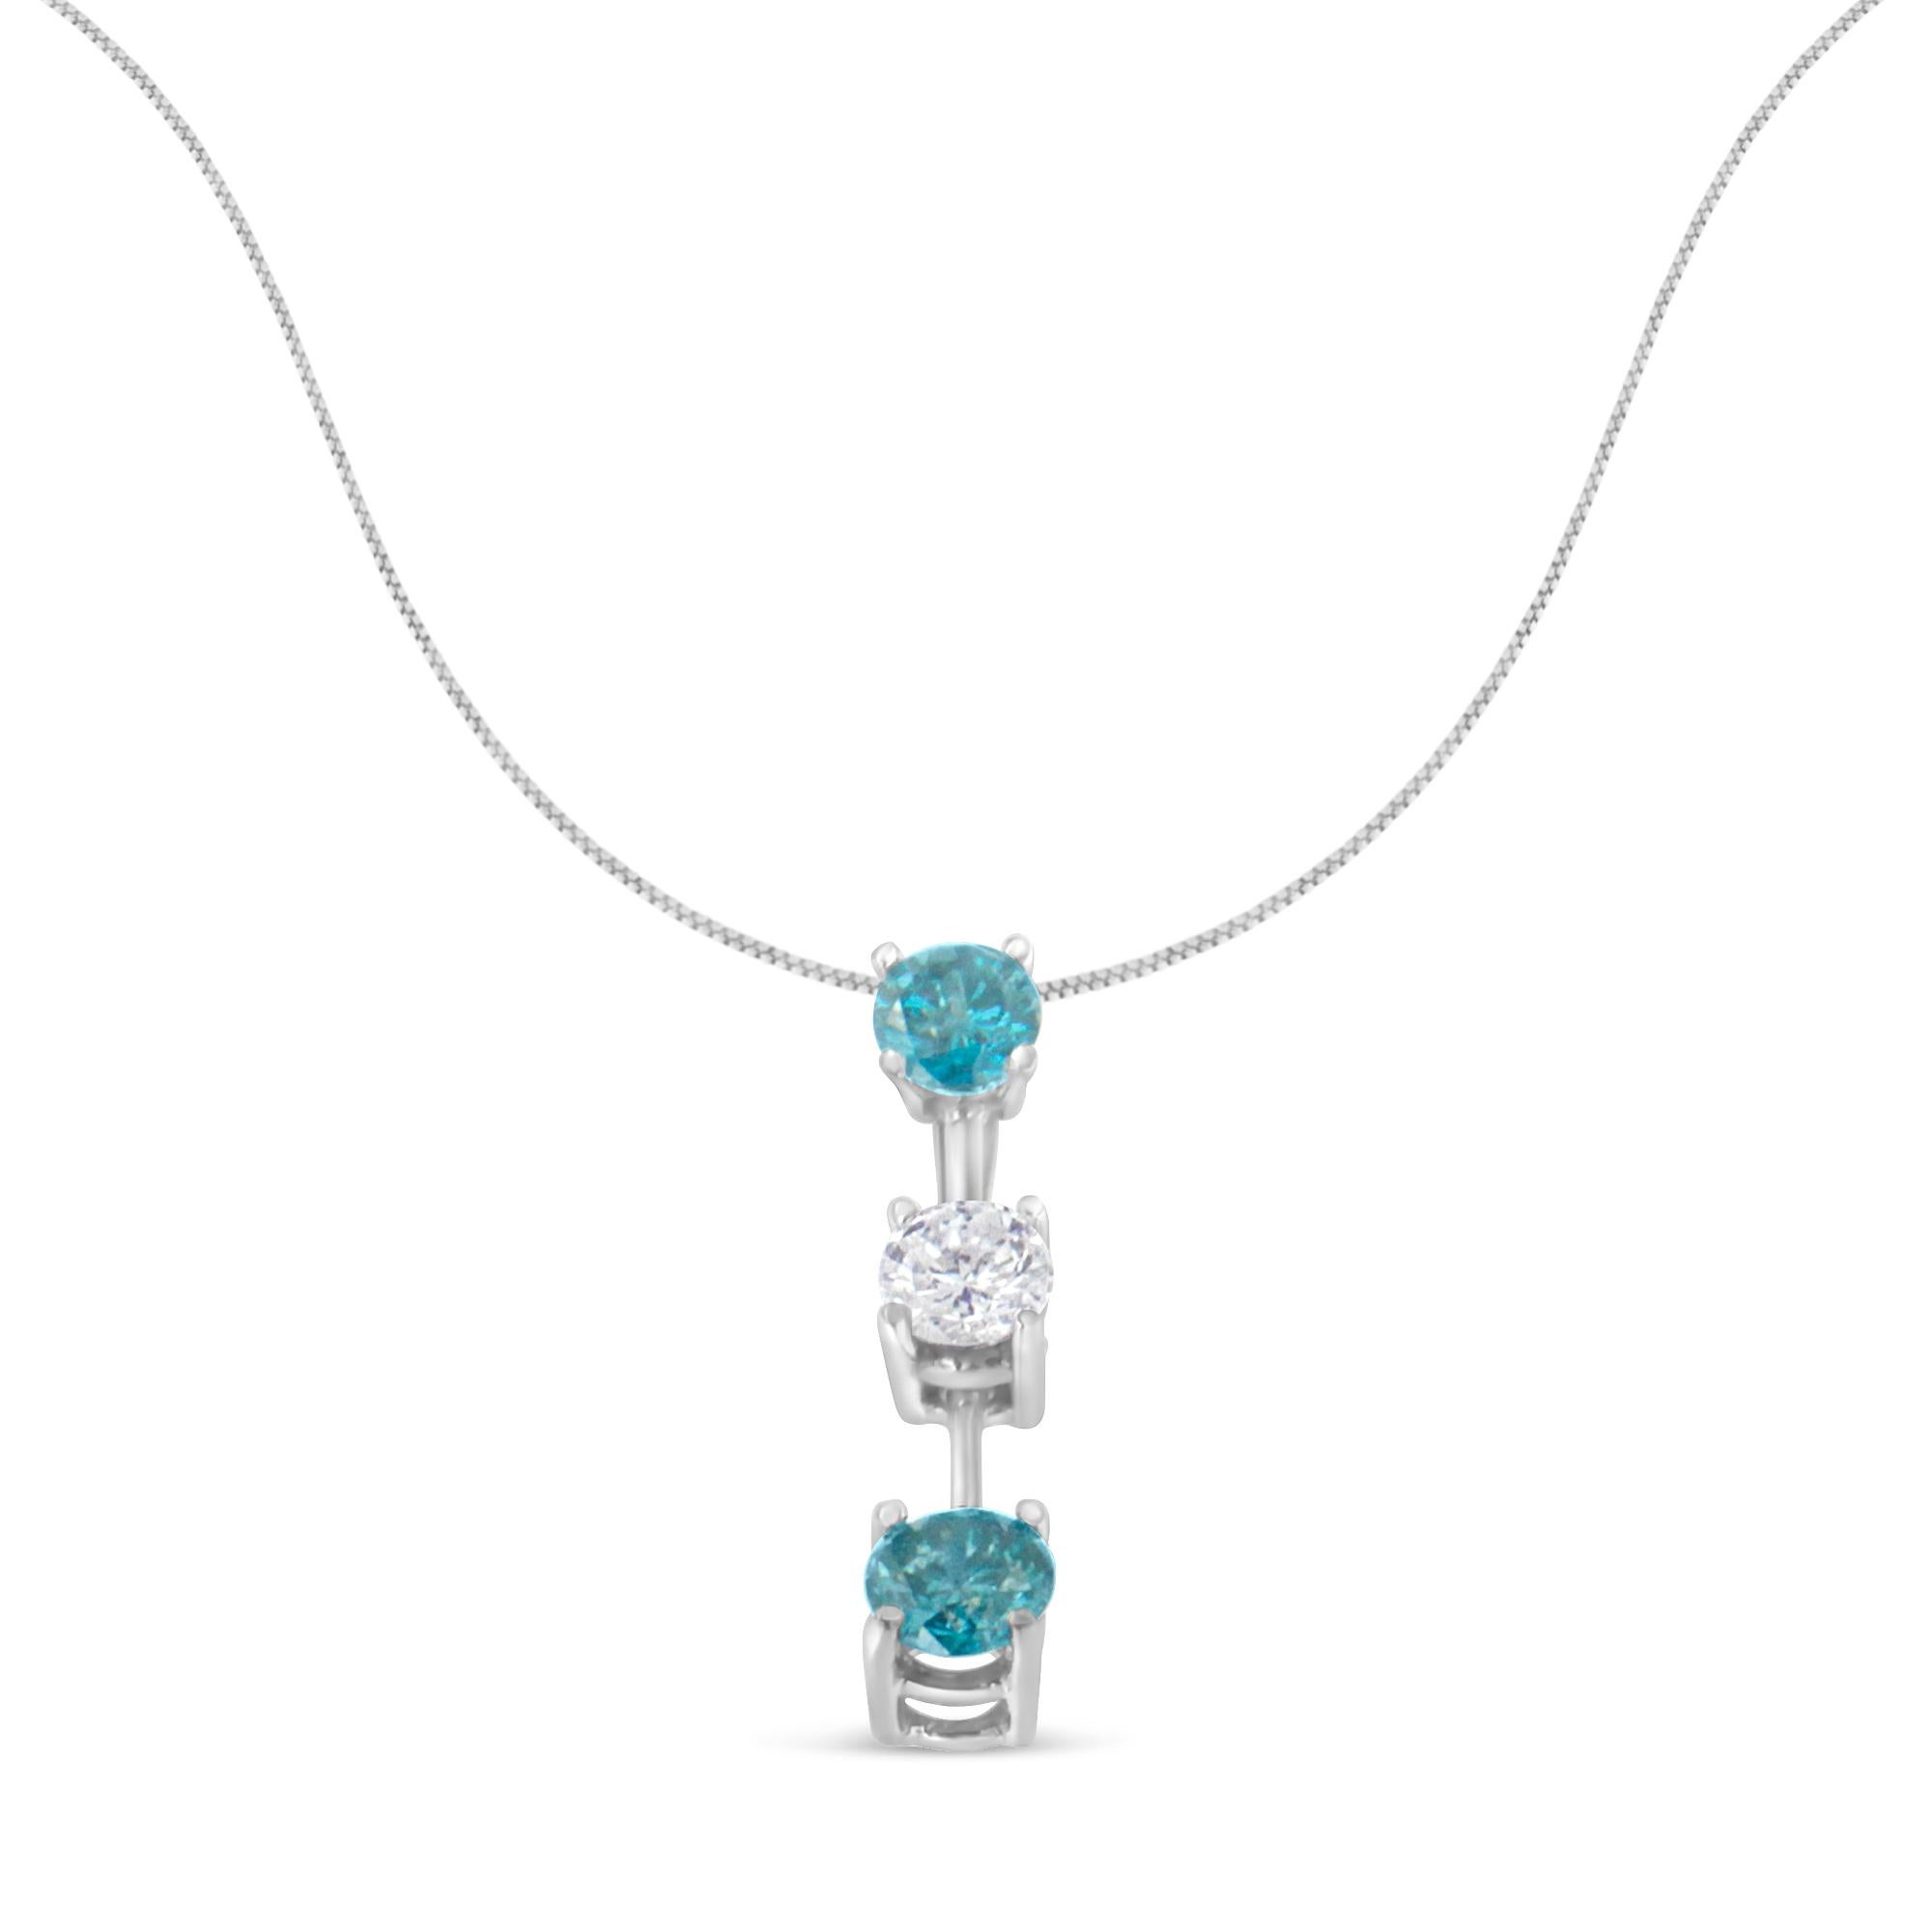 Attractive in design, this alluring pendant will create a great look to any attire. Chisel to excellence, the pendant is crafted of luster 14 karats white gold and has a shiny appeal. Further, the ornamentation with white and treated blue round cut